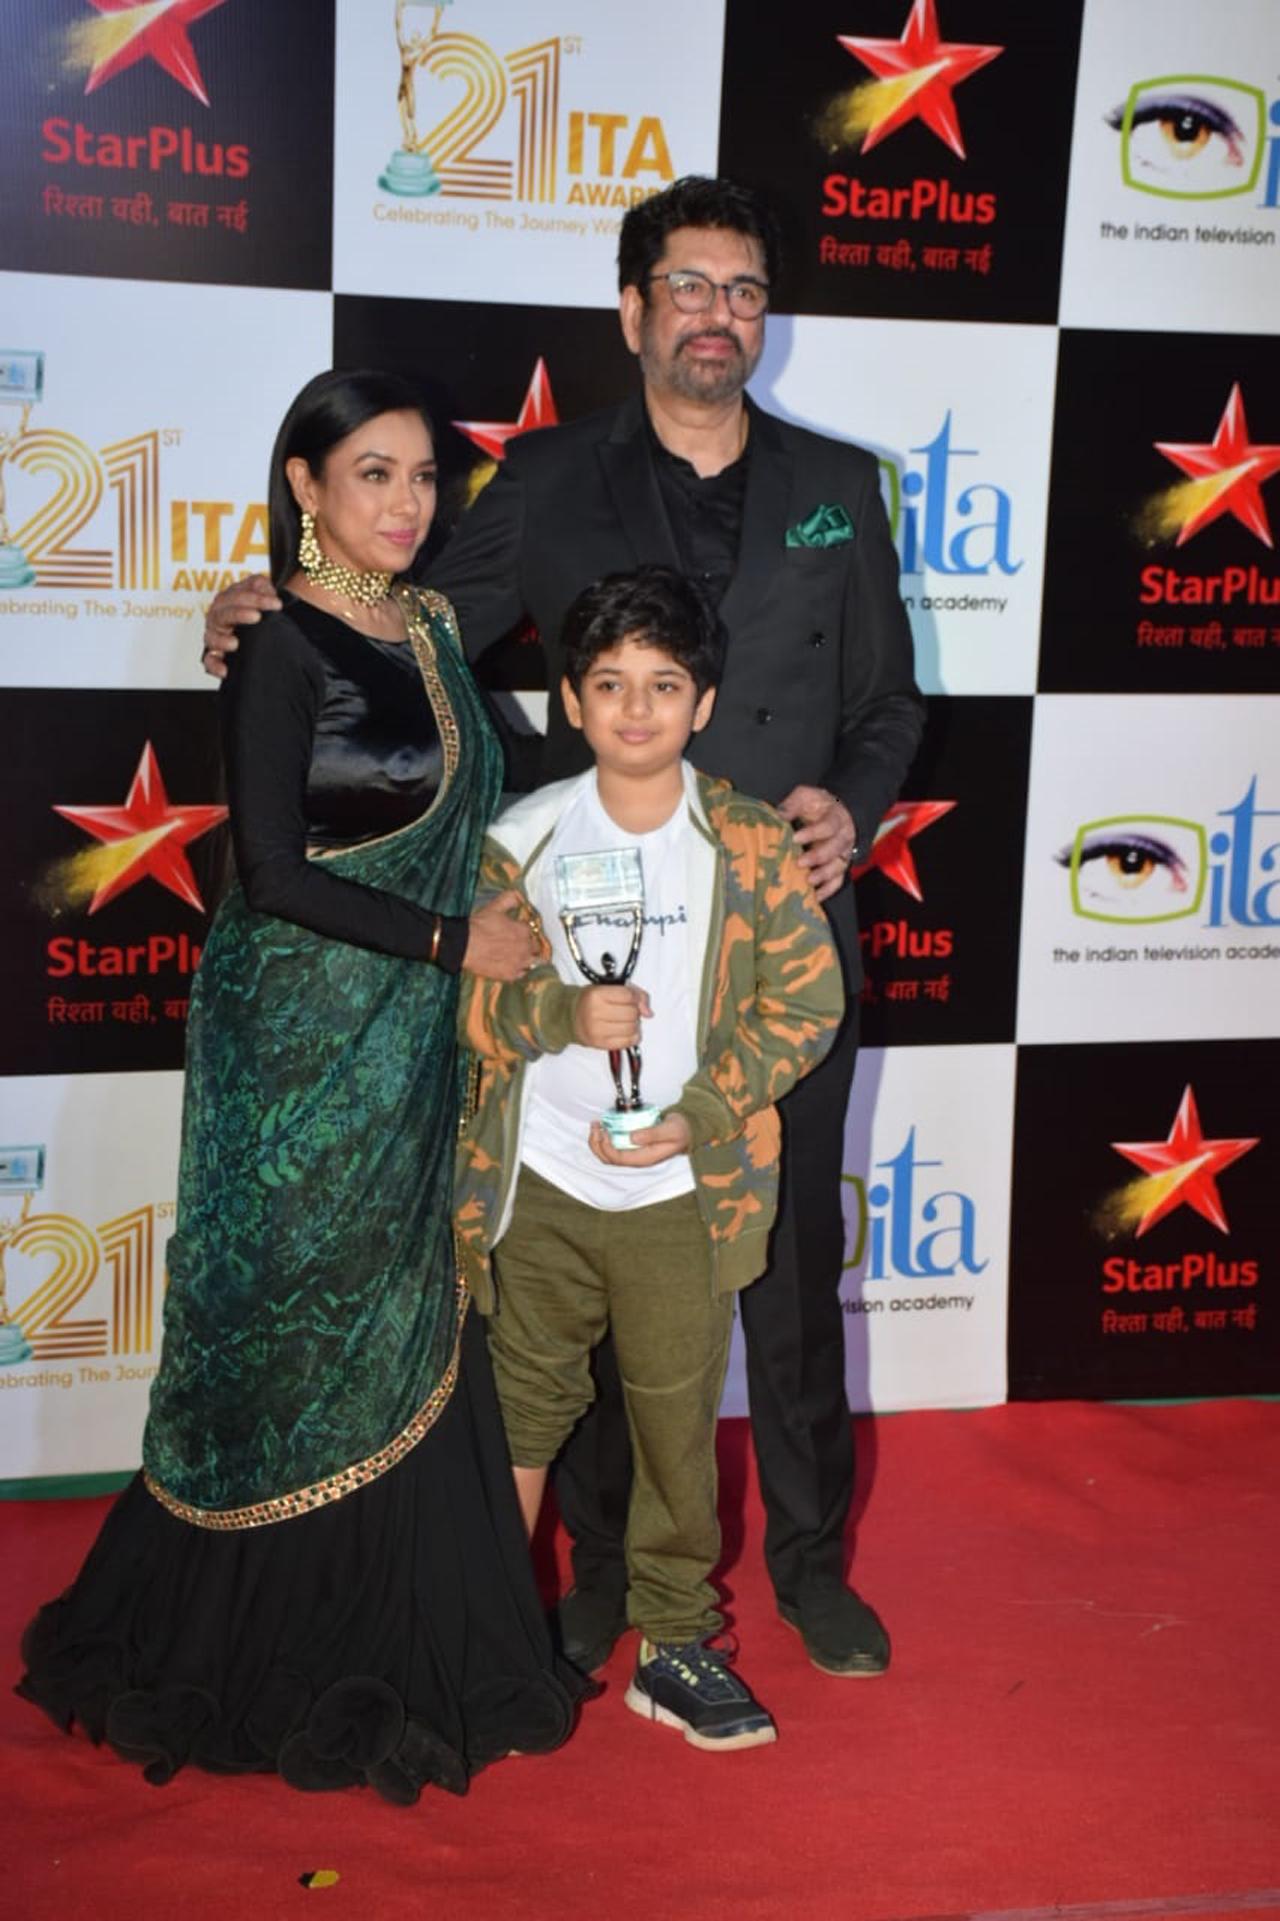 Rupali Ganguly posed with her husband Ashwin K Verma and son Rudransh as they attended 21st Indian Television Academy Awards.